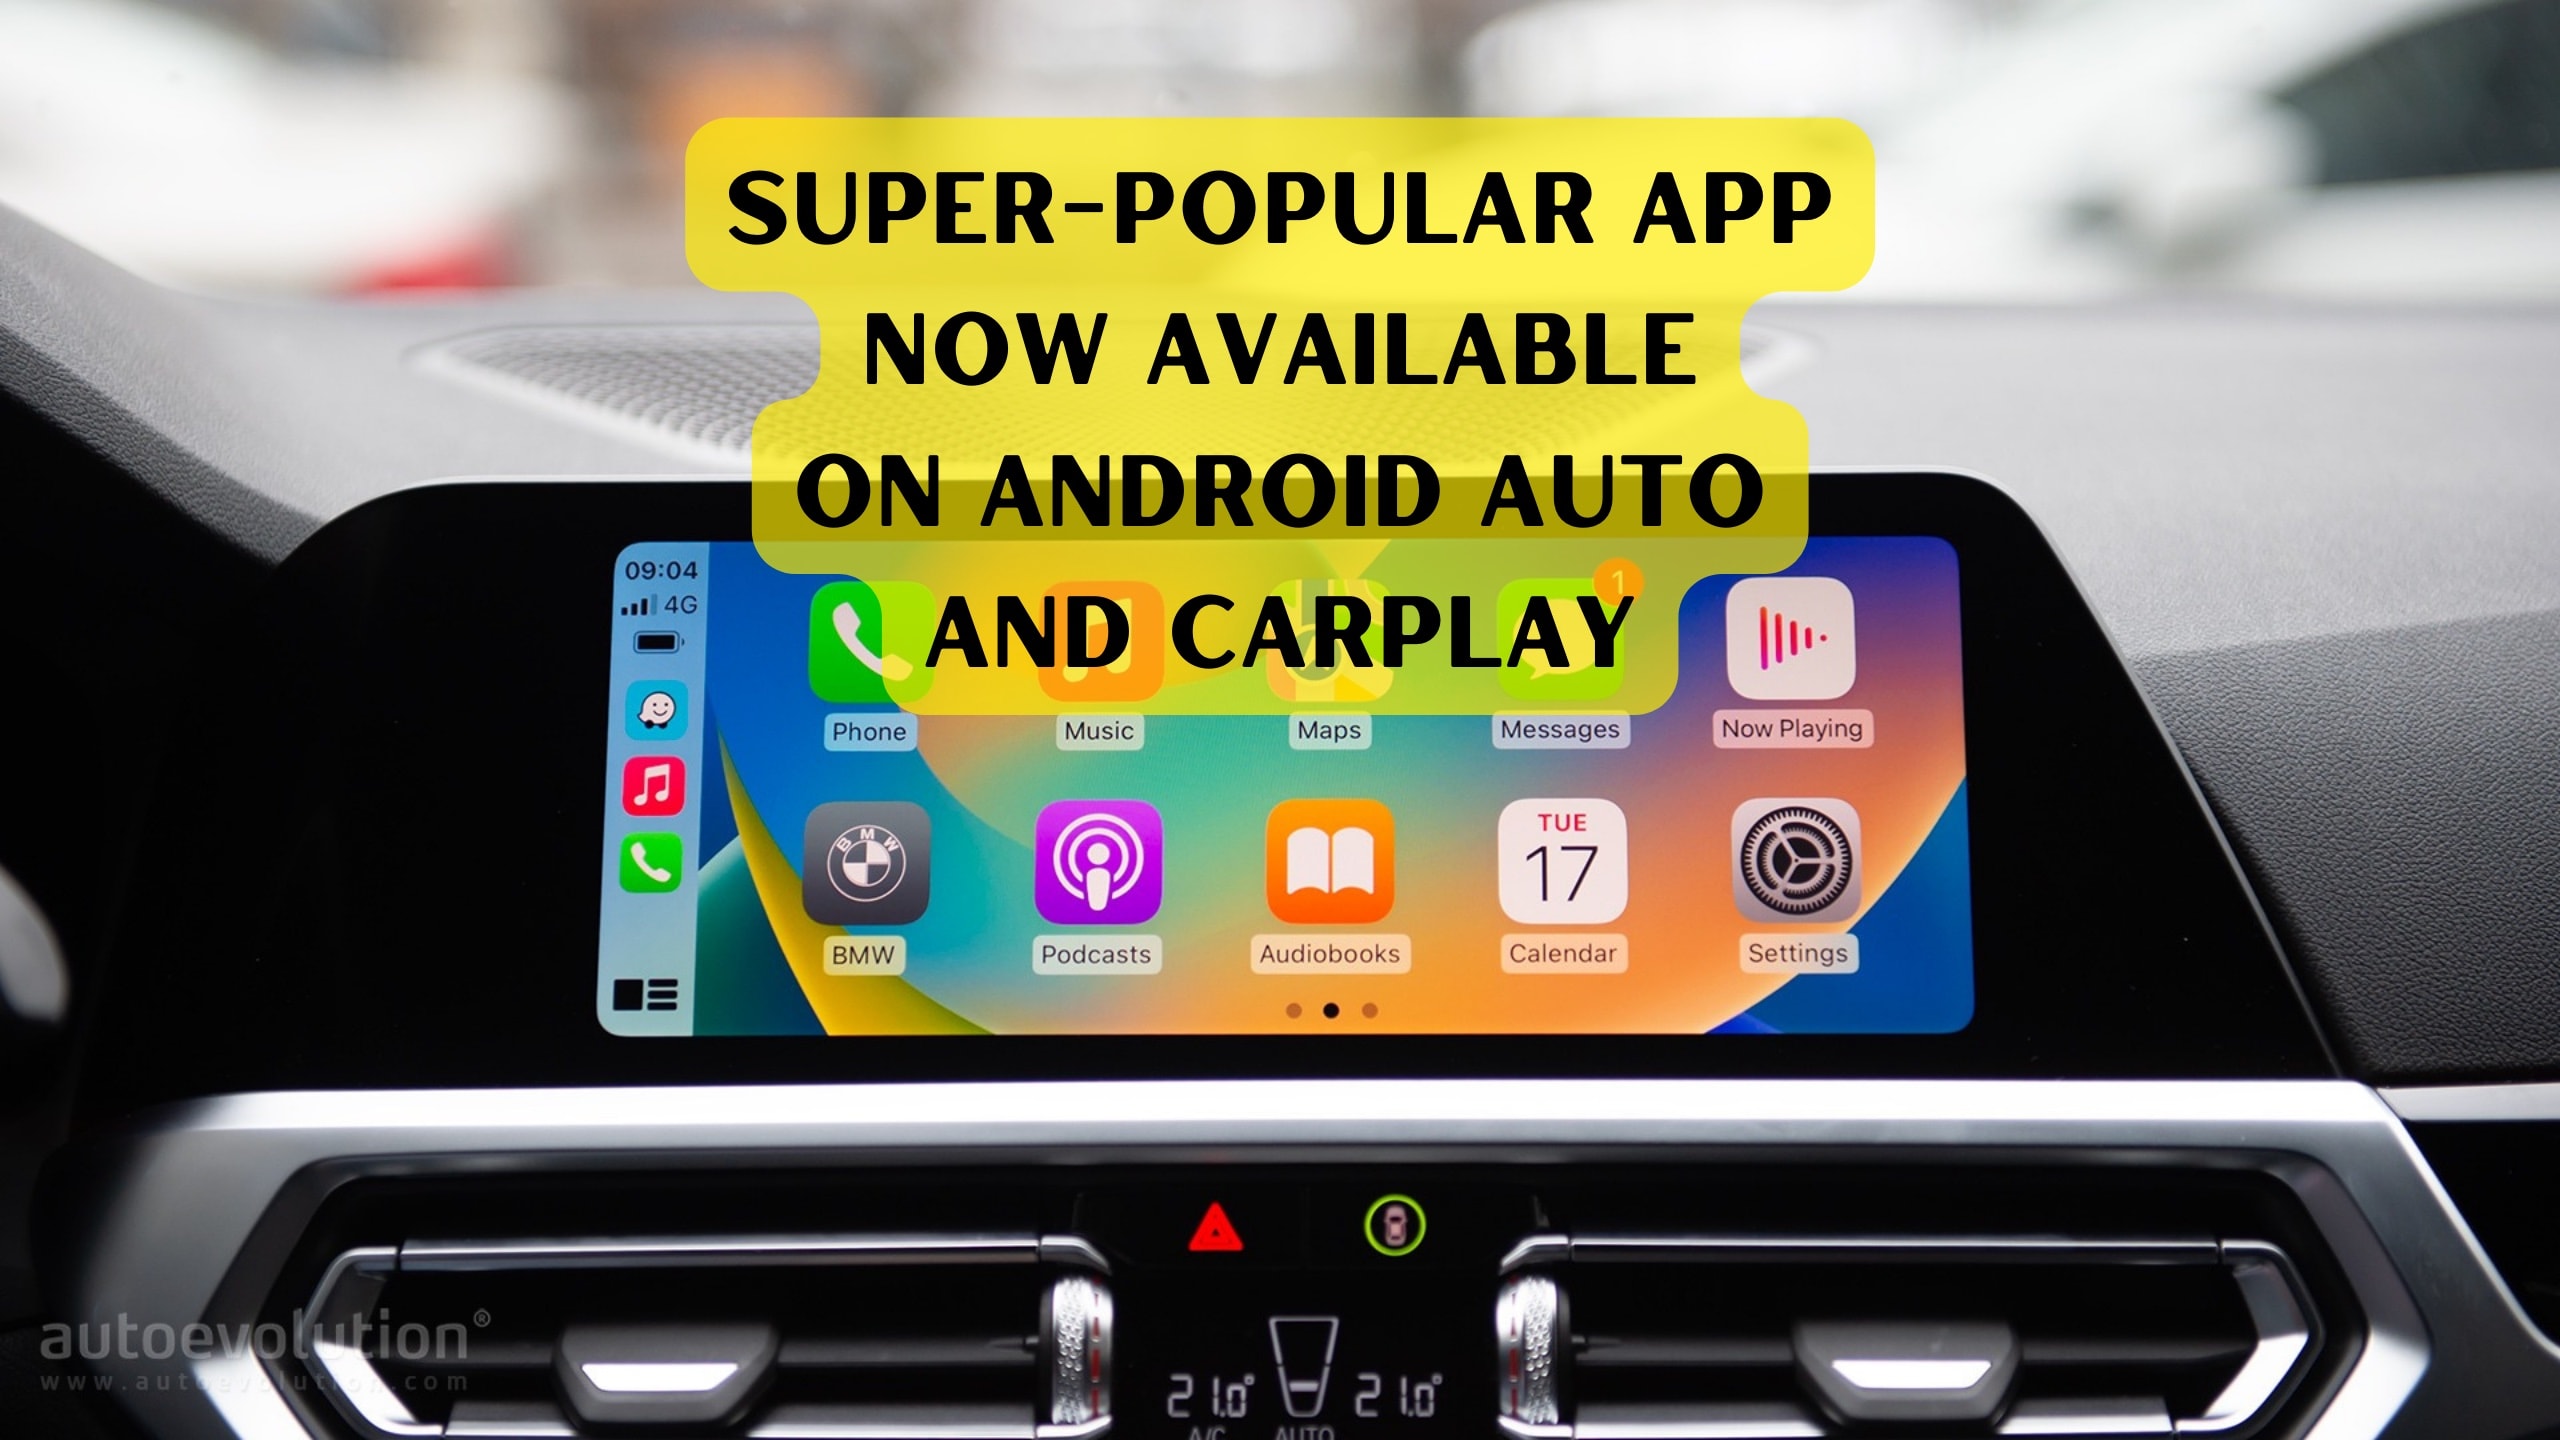 A popular new app is now available on Android Auto and CarPlay